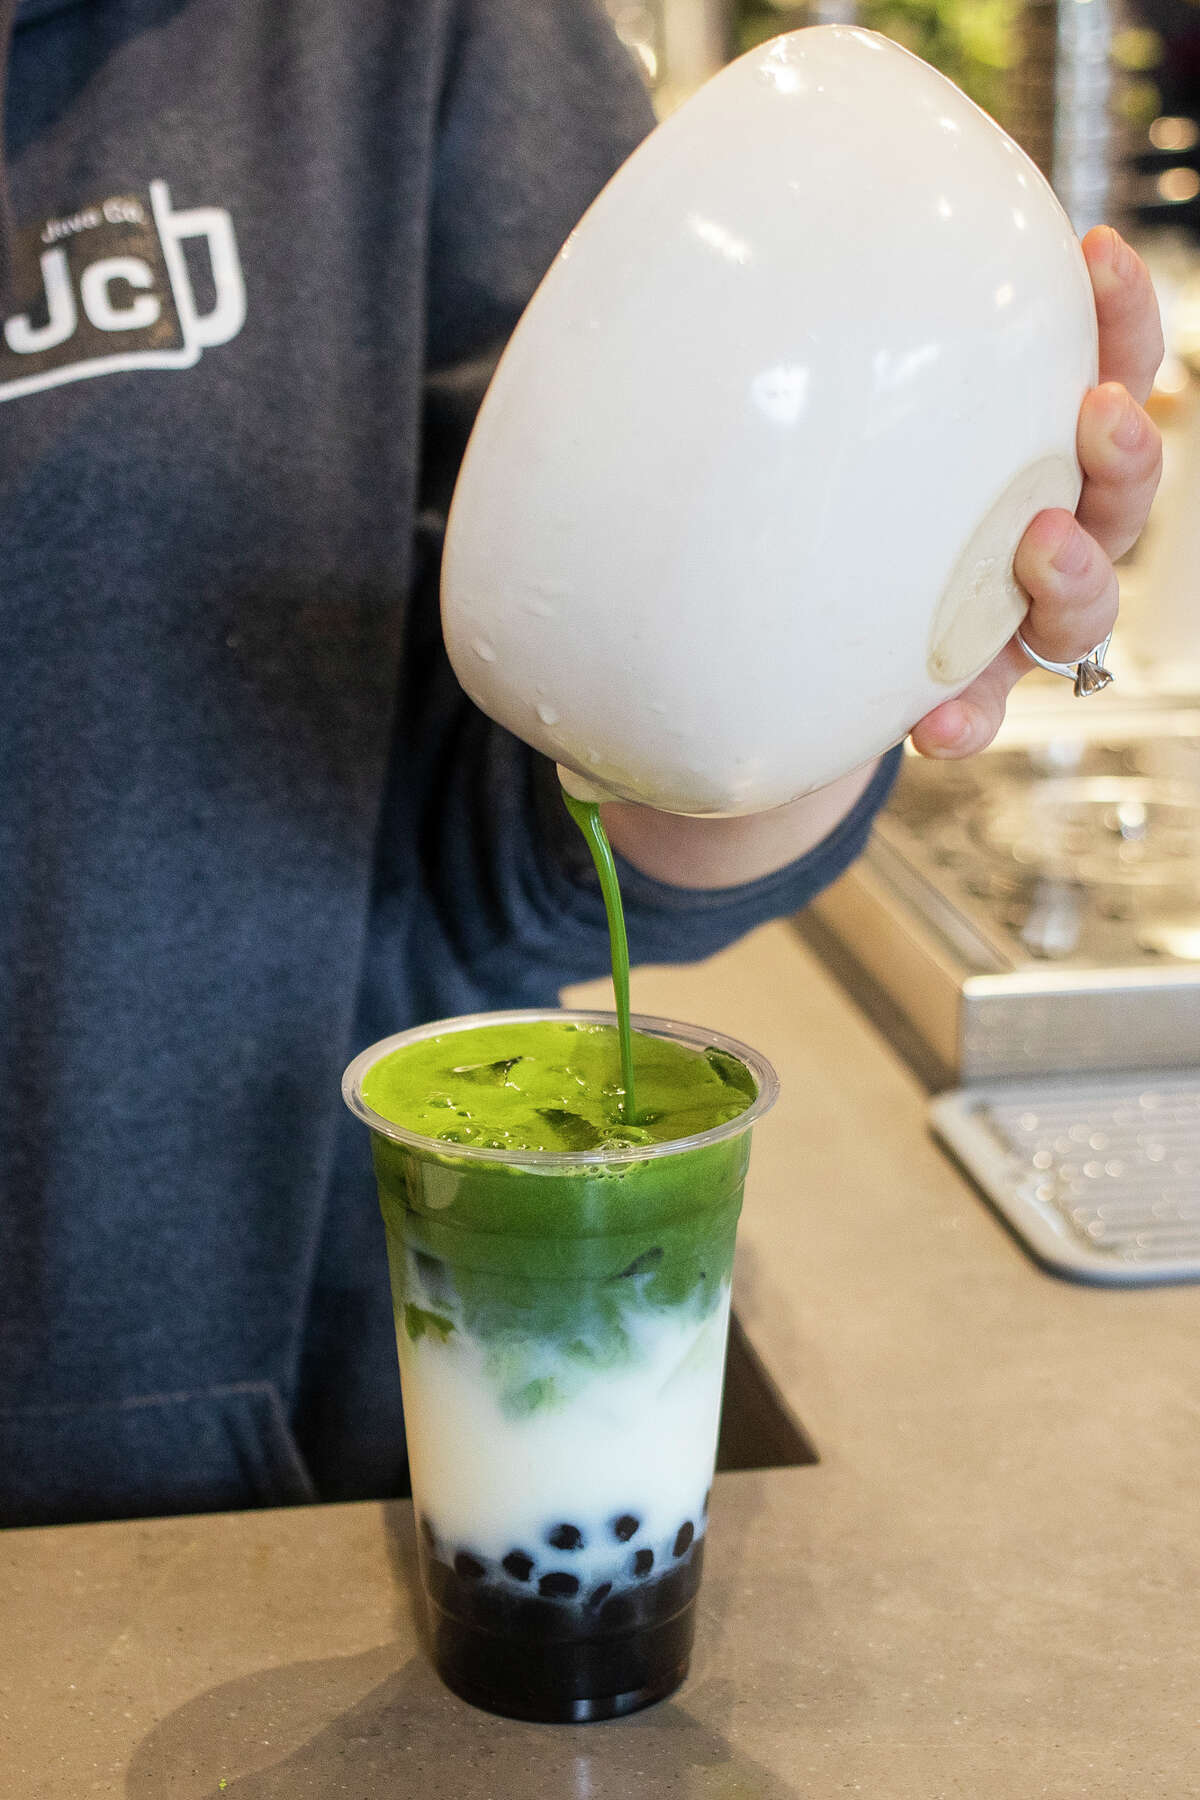 Grace LaBonte, a barista at Grove Tea Lounge, pours a matcha latte Tuesday, May 3, 2022 at the cafe in Midland.